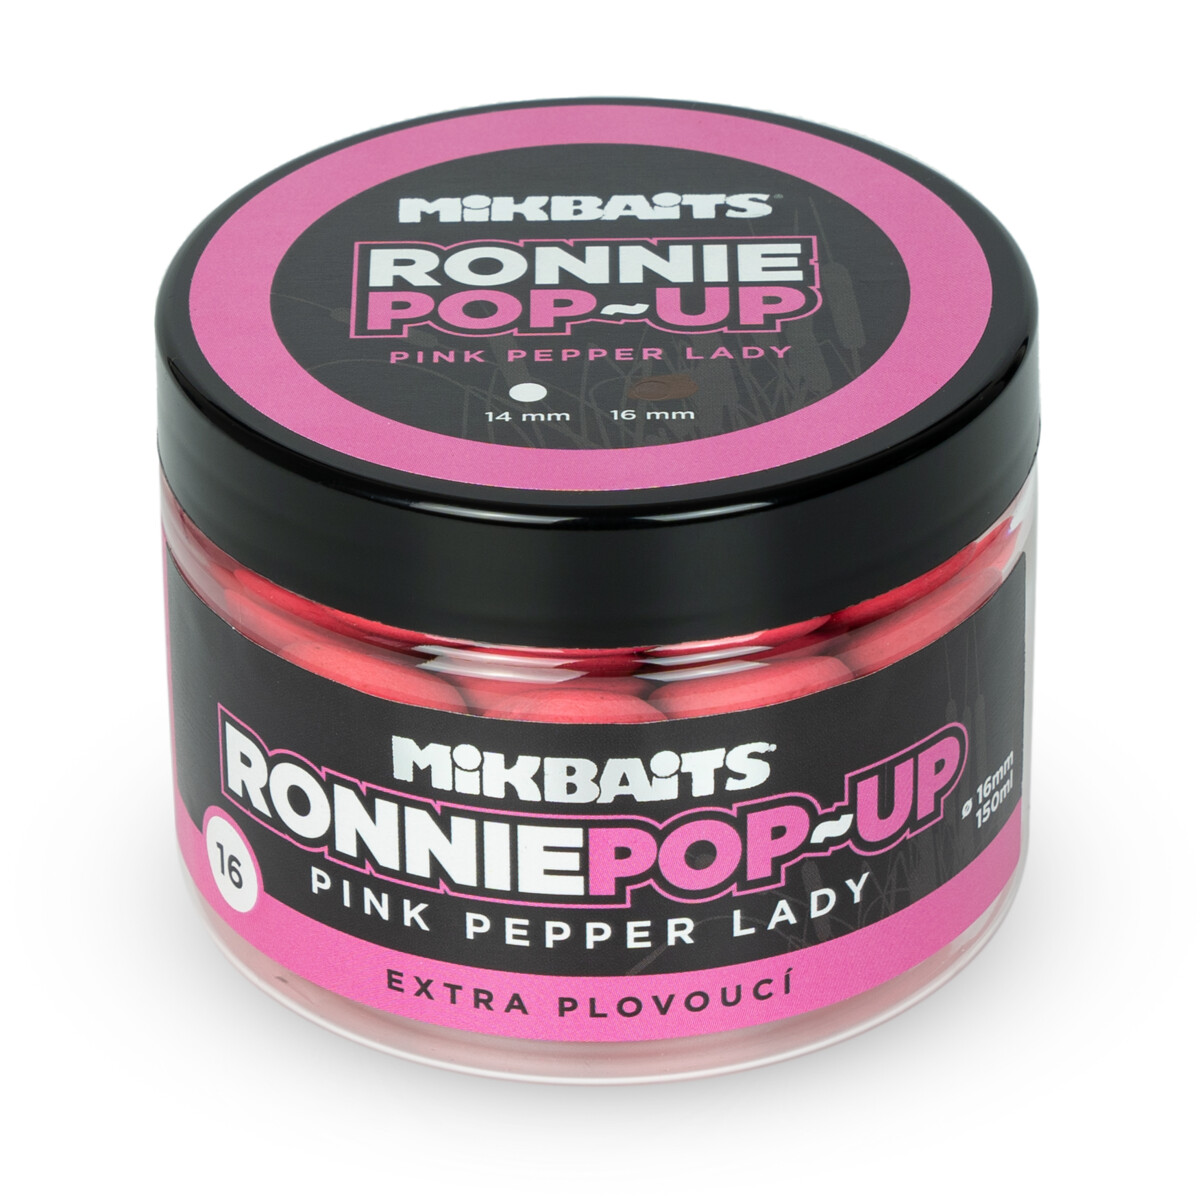 MIKBAITS Ronnie pop-up 150ml - Pink Pepper Lady 16mm